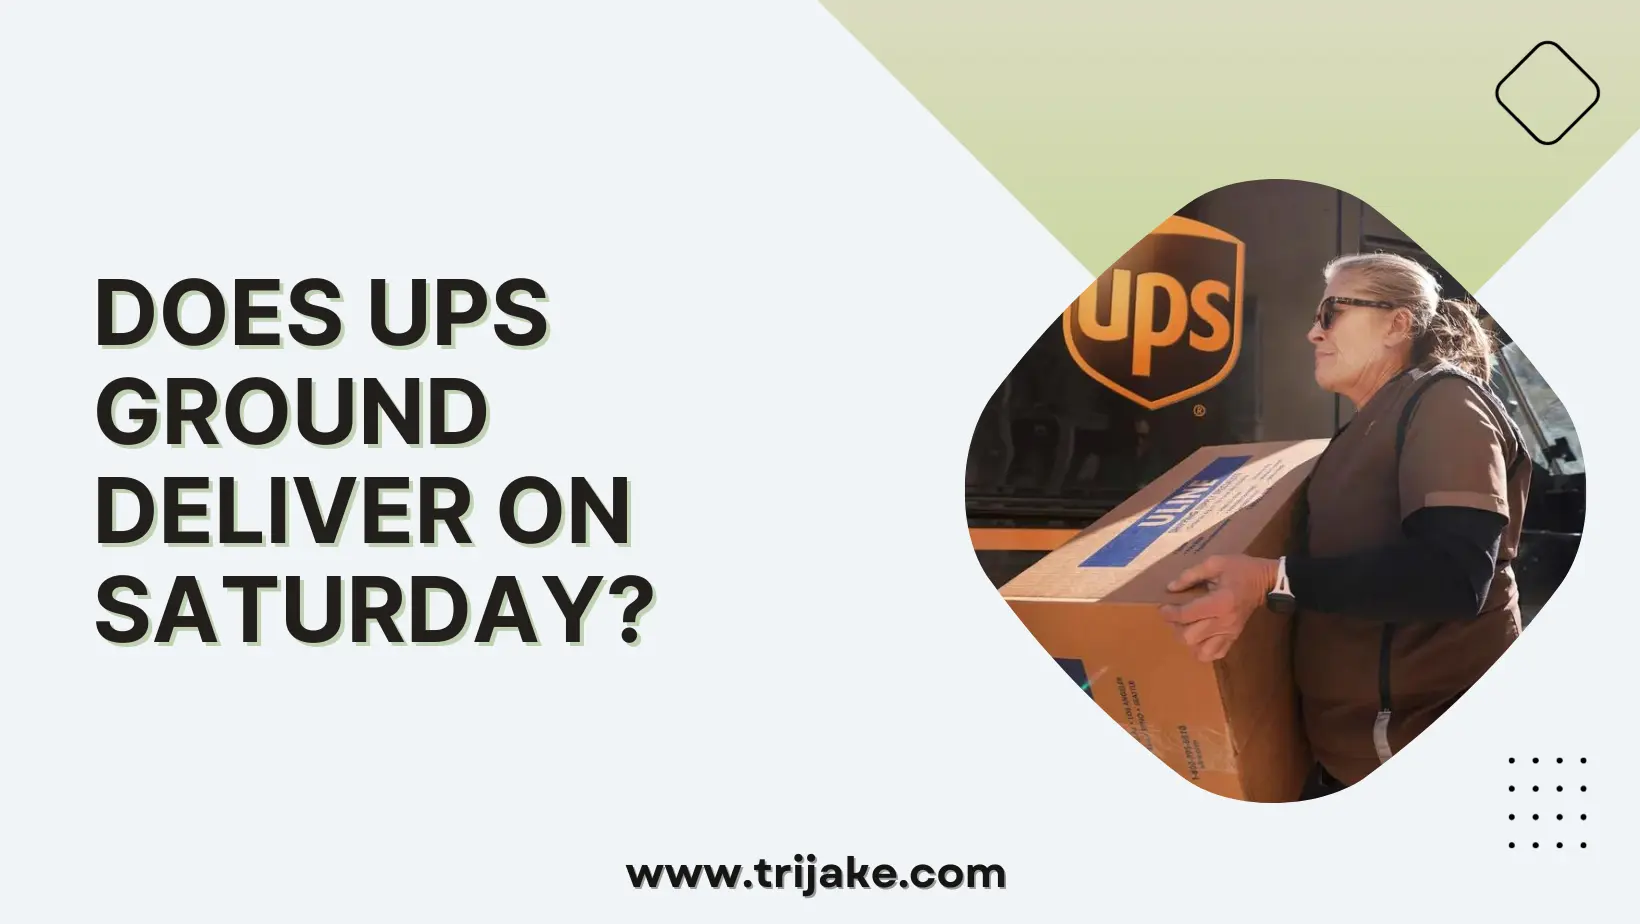 Does UPS Ground Deliver on Saturday